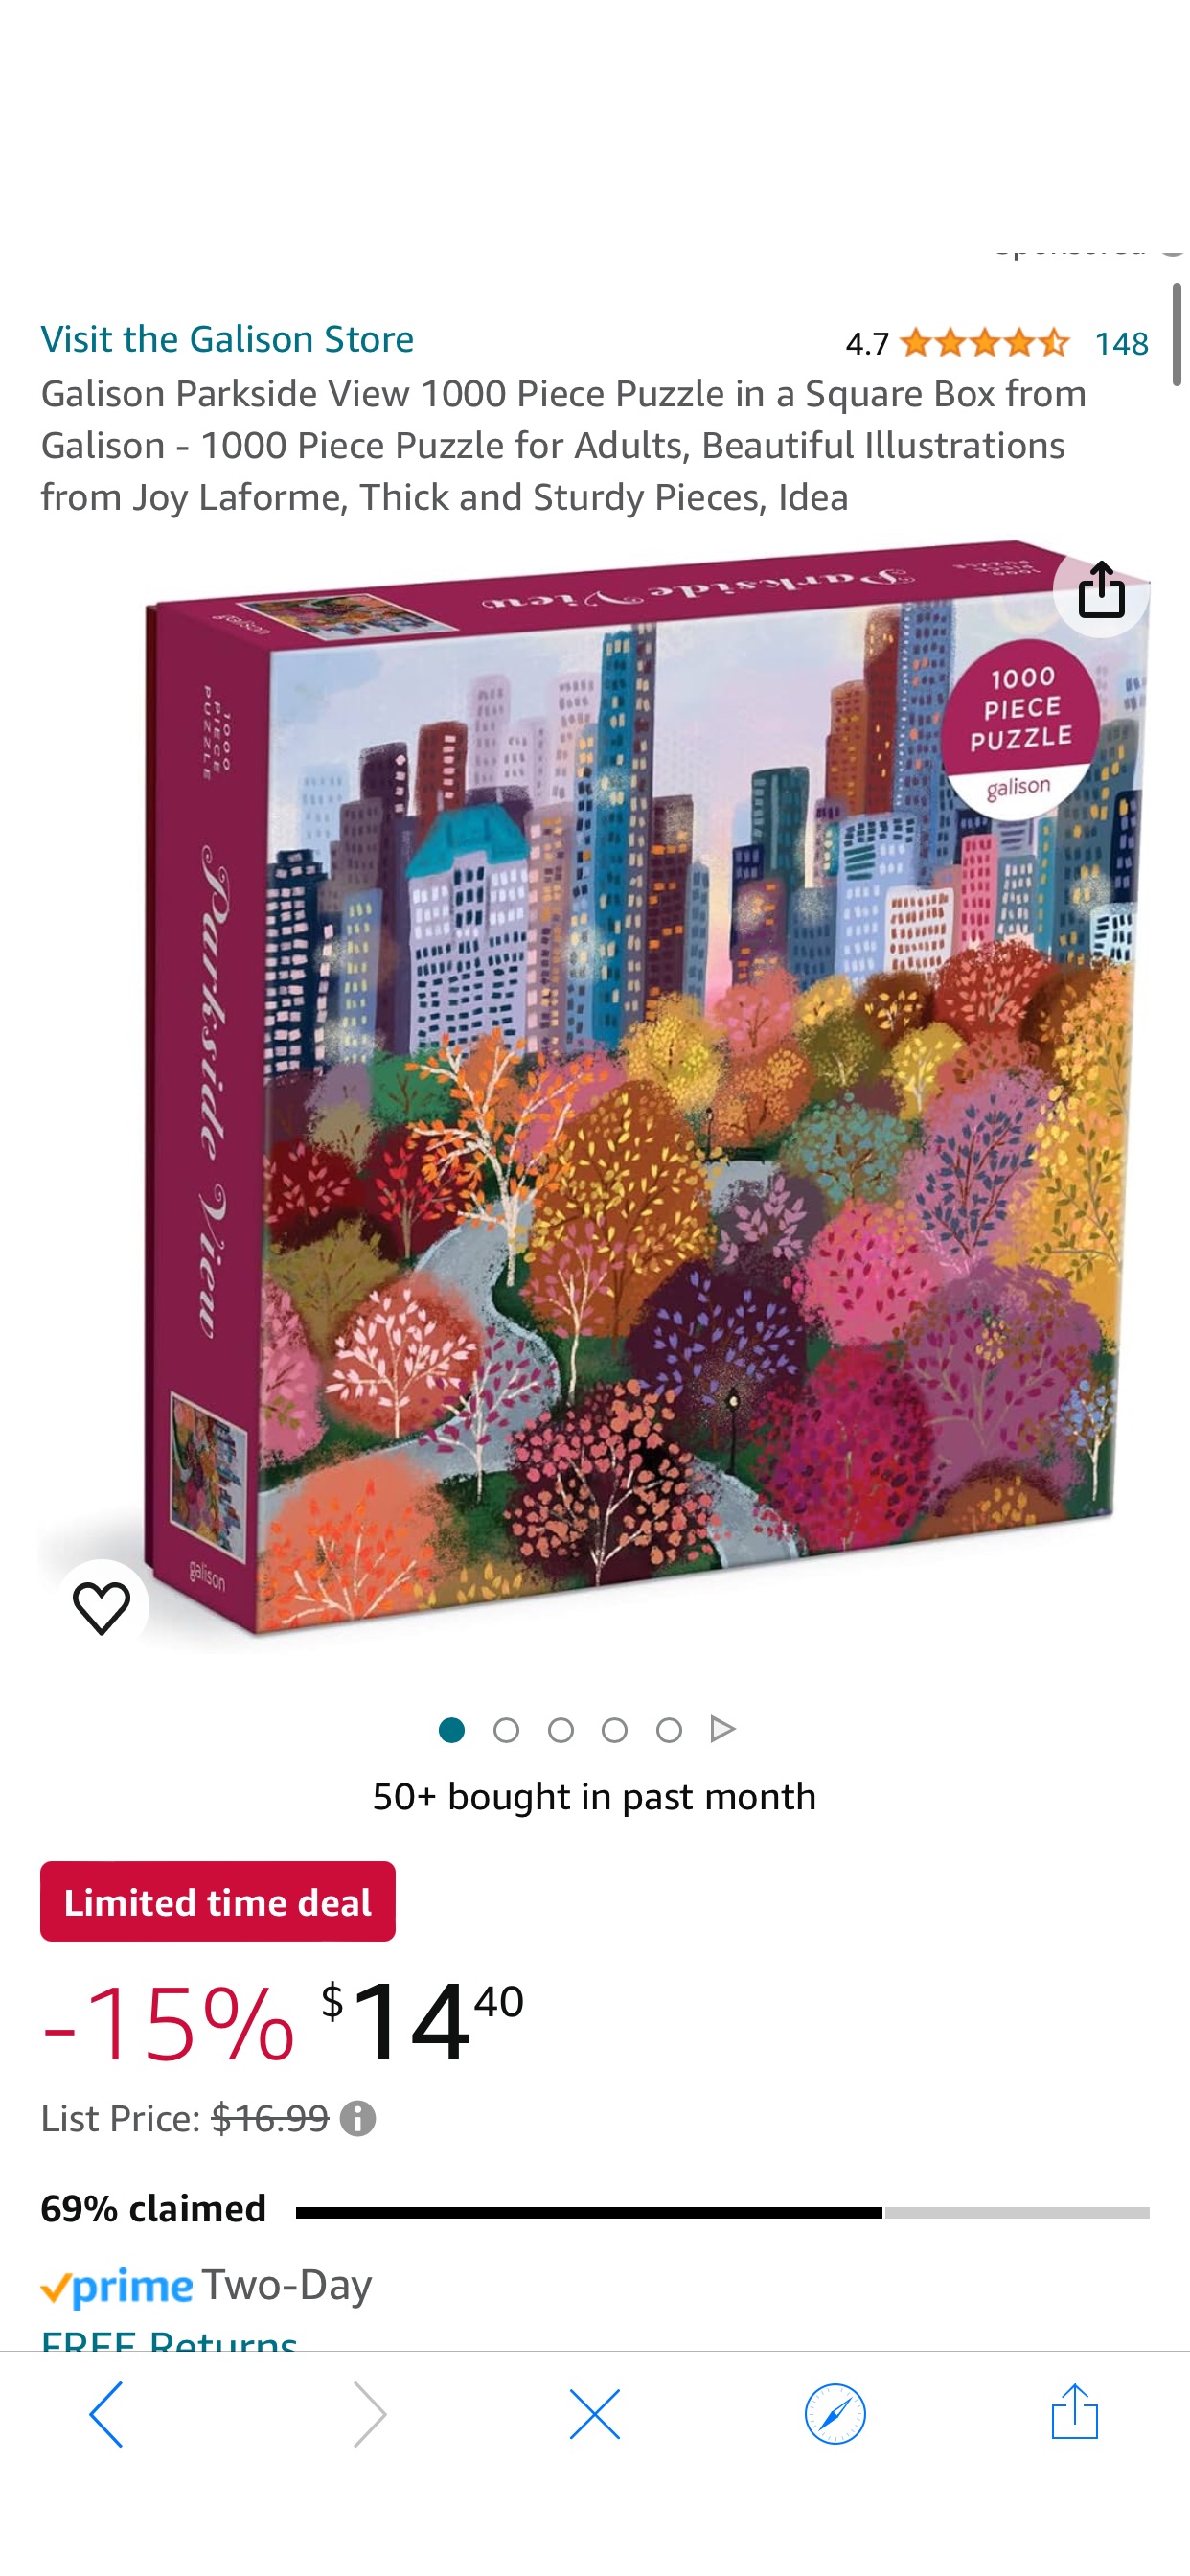 Amazon.com: Galison Parkside View 1000 Piece Puzzle in a Square Box from Galison - 1000 Piece Puzzle for Adults, Beautiful Illustrations from Joy Laforme, Thick and Sturdy Pieces, Idea : Galison, Lafo